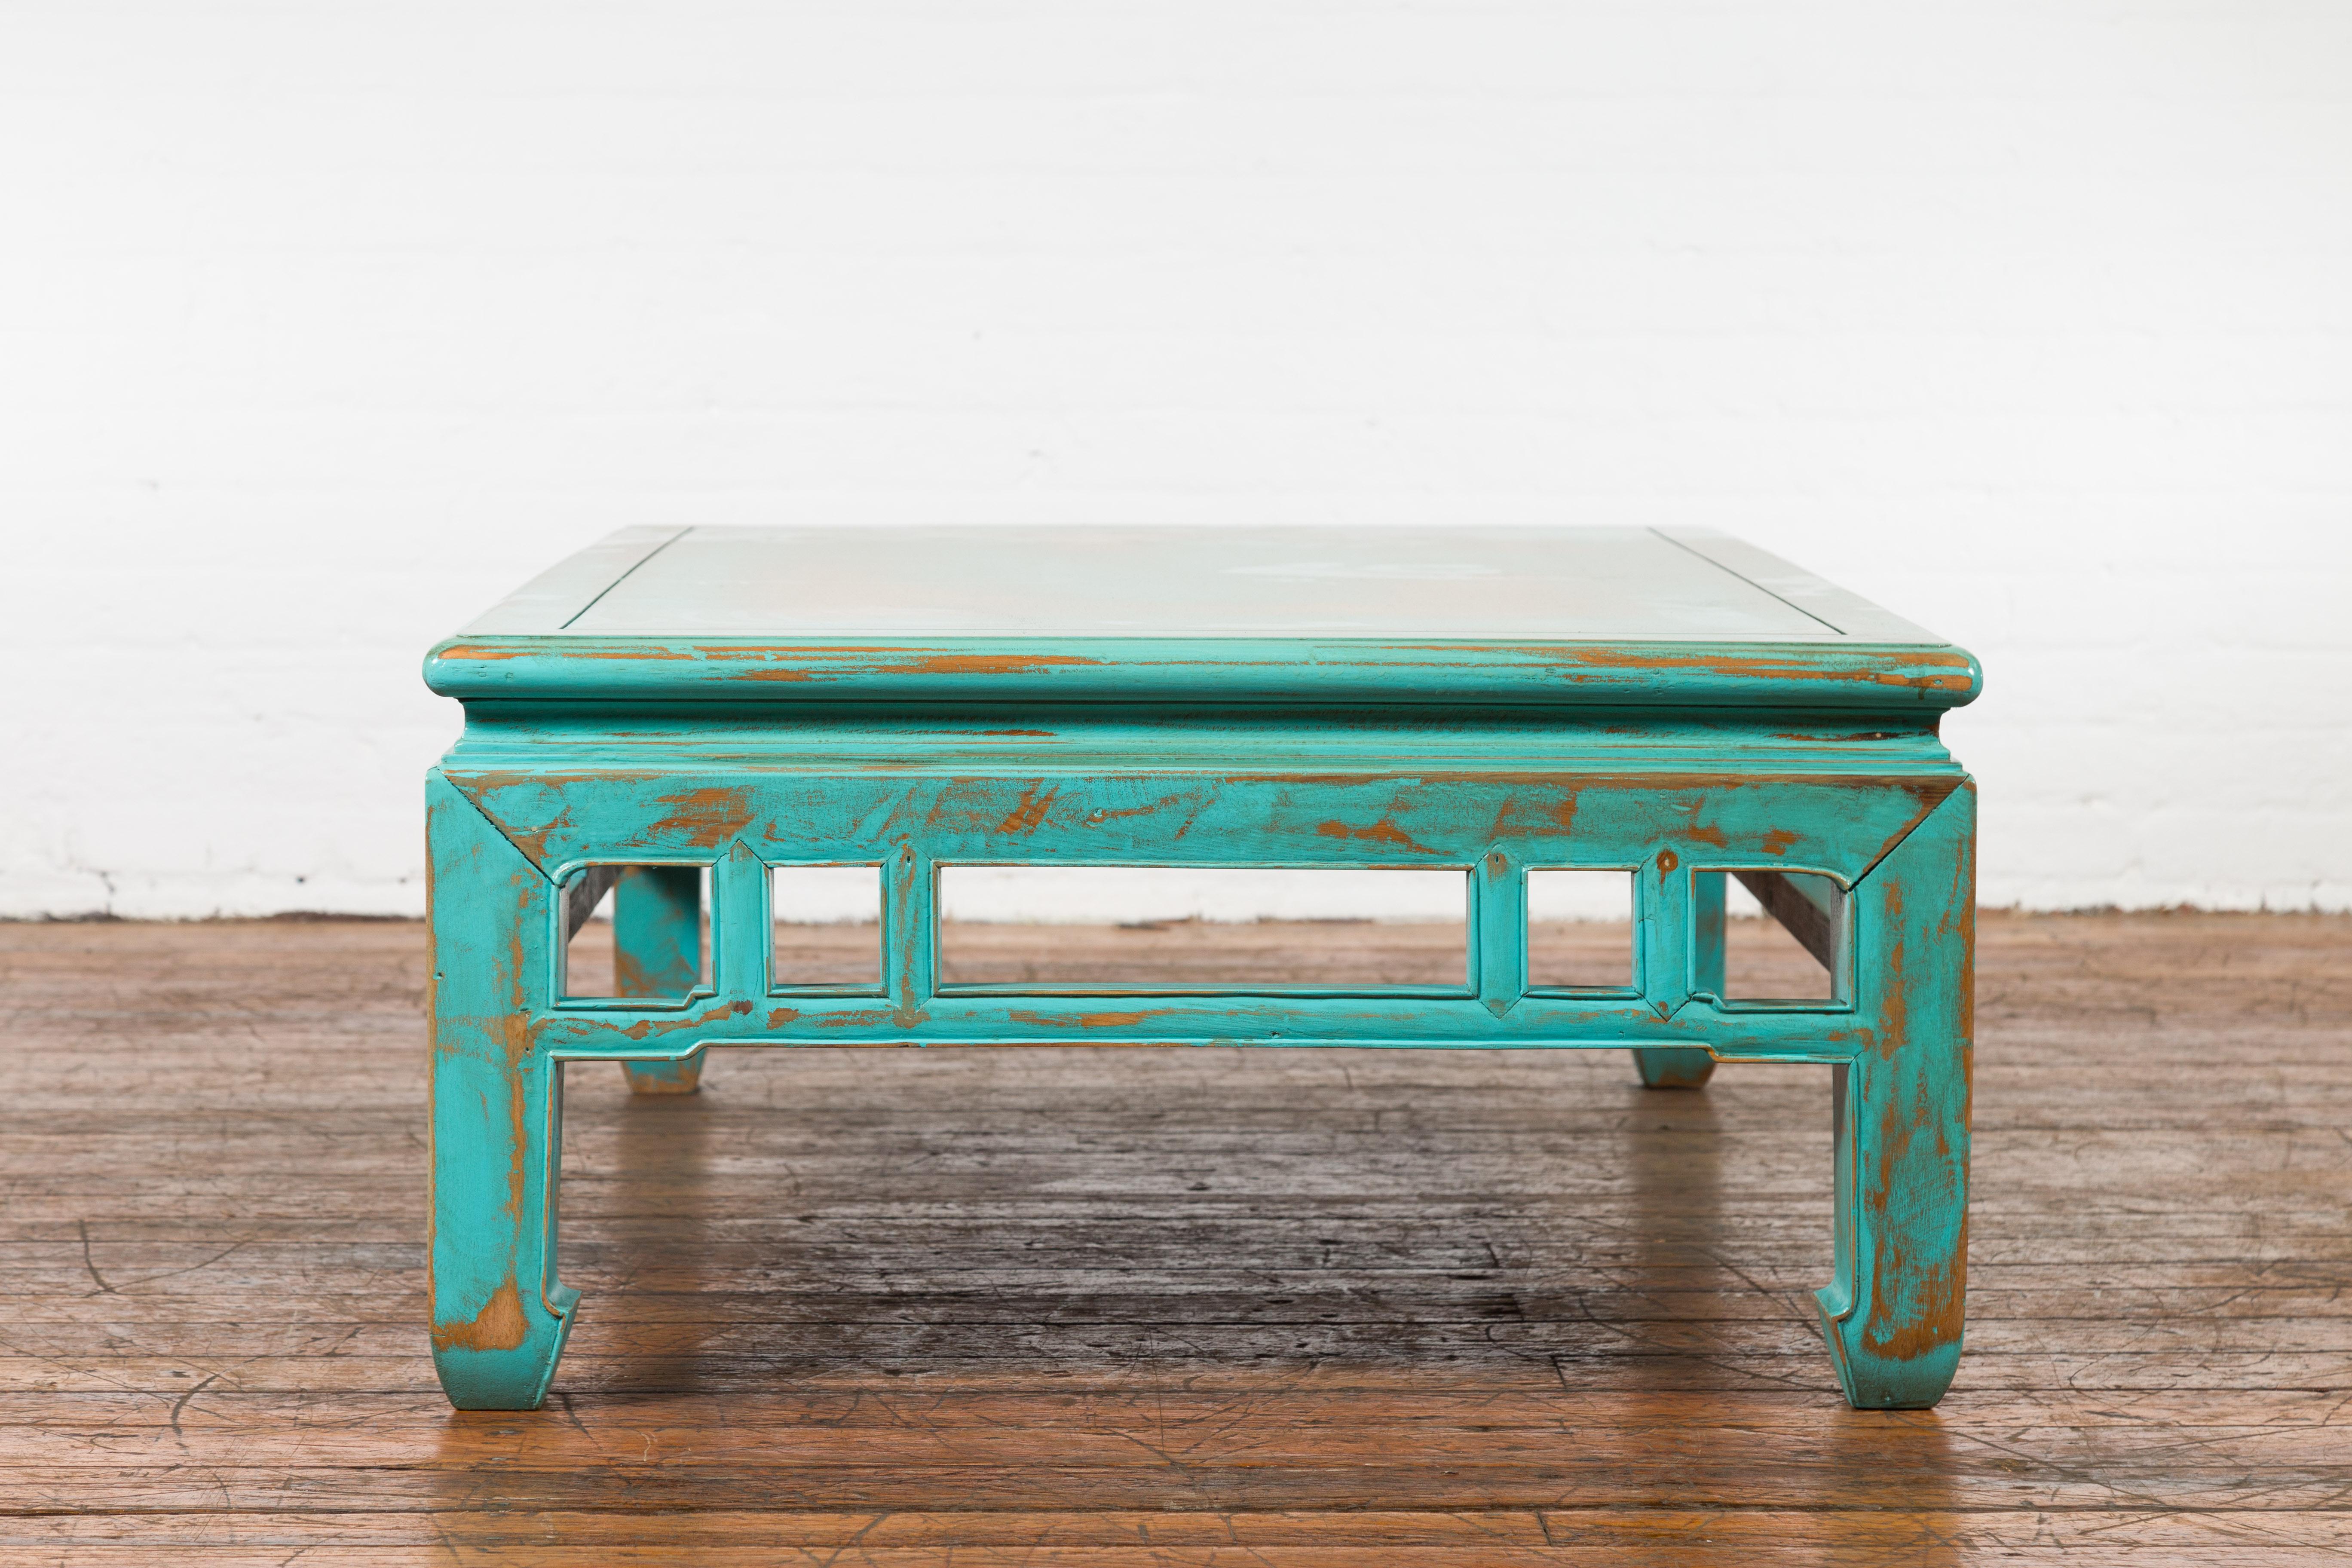 Chinese Qing Dynasty Low Kang Coffee Table with Custom Aqua Teal Lacquer For Sale 9